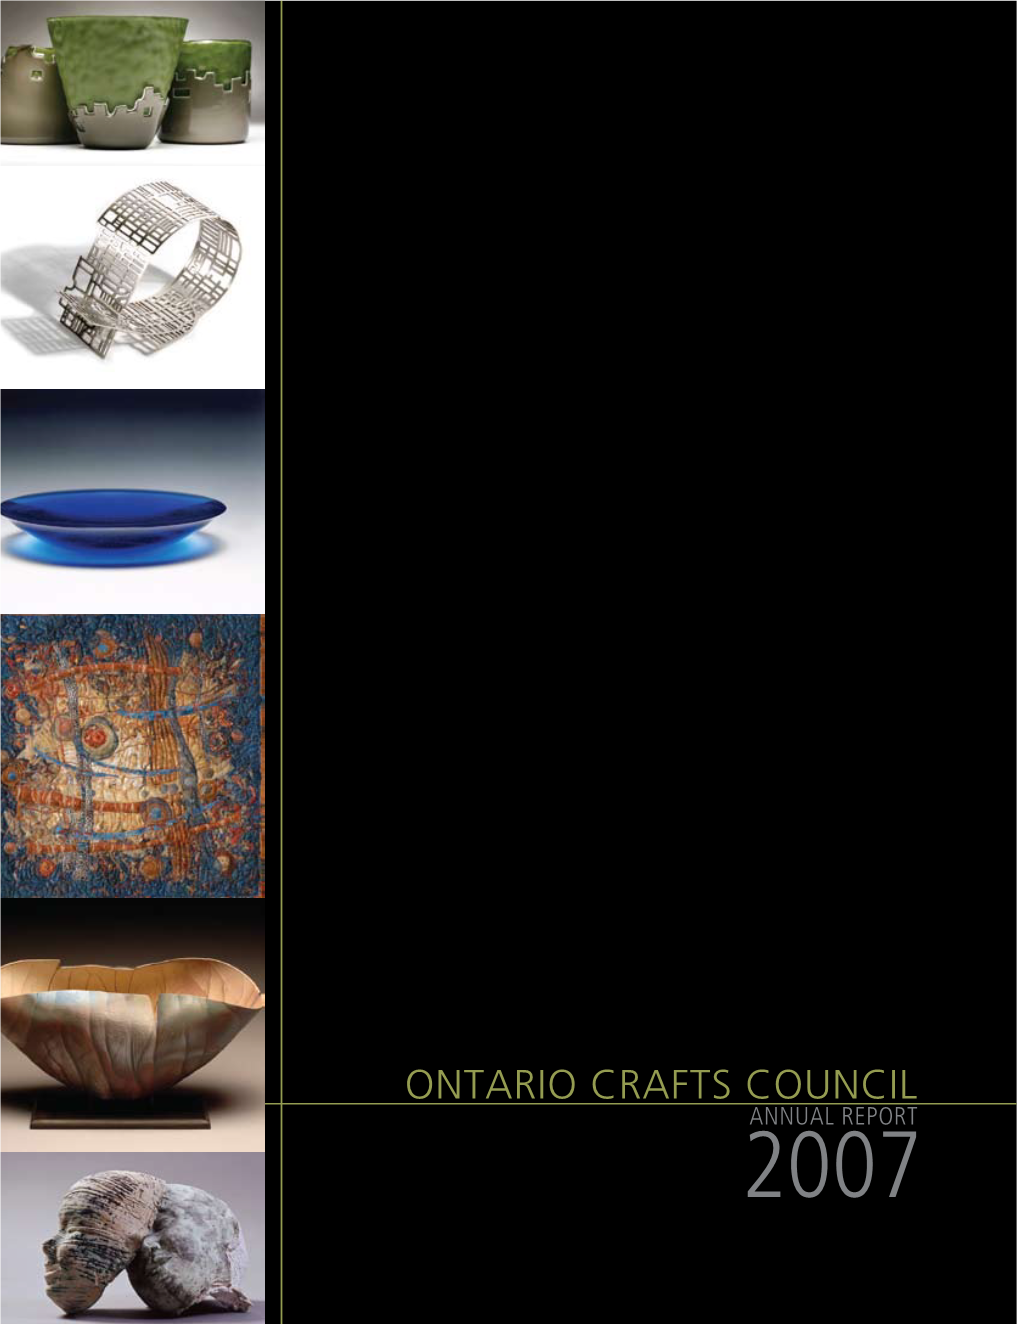 Ontario Crafts Council Annual Report 2007